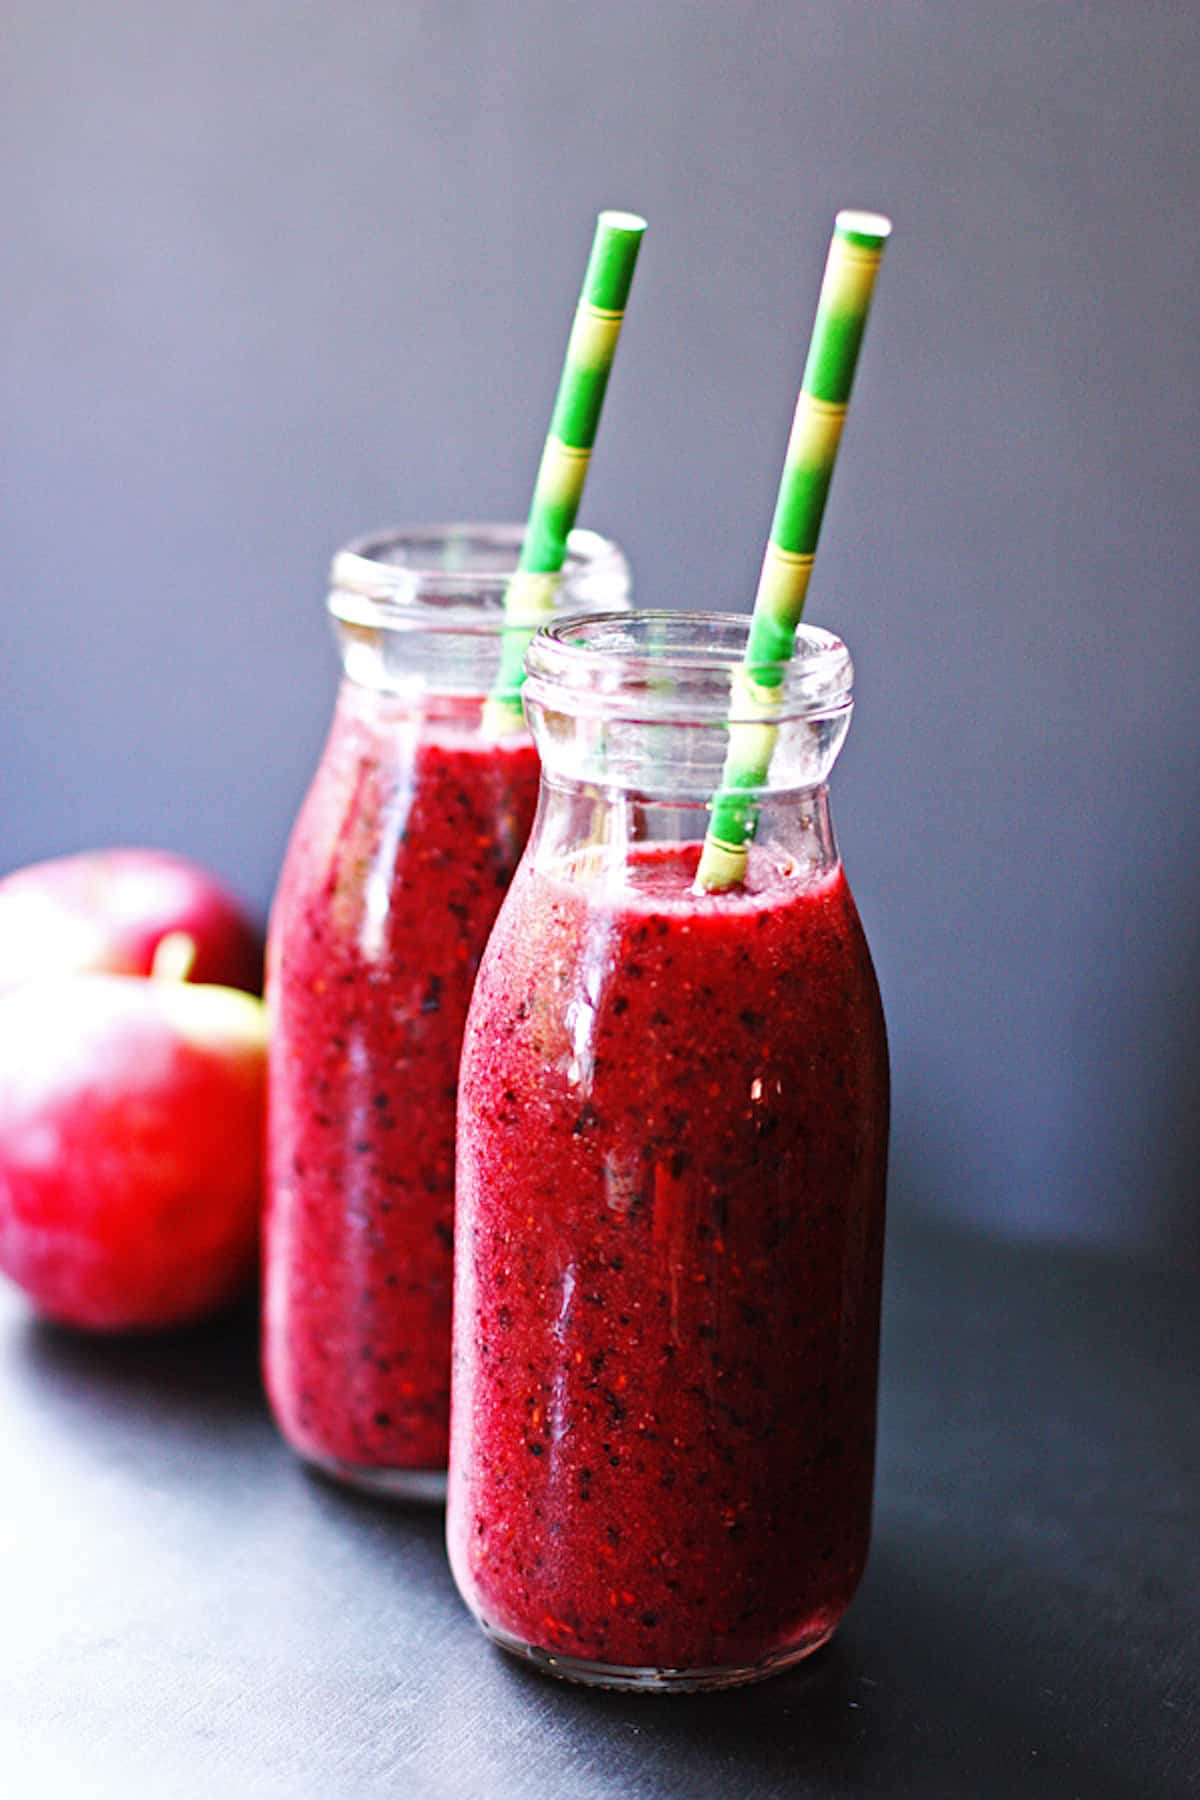 This Apple Berry Smoothie recipe can be found at Jeannie's Tried and True Recipes.